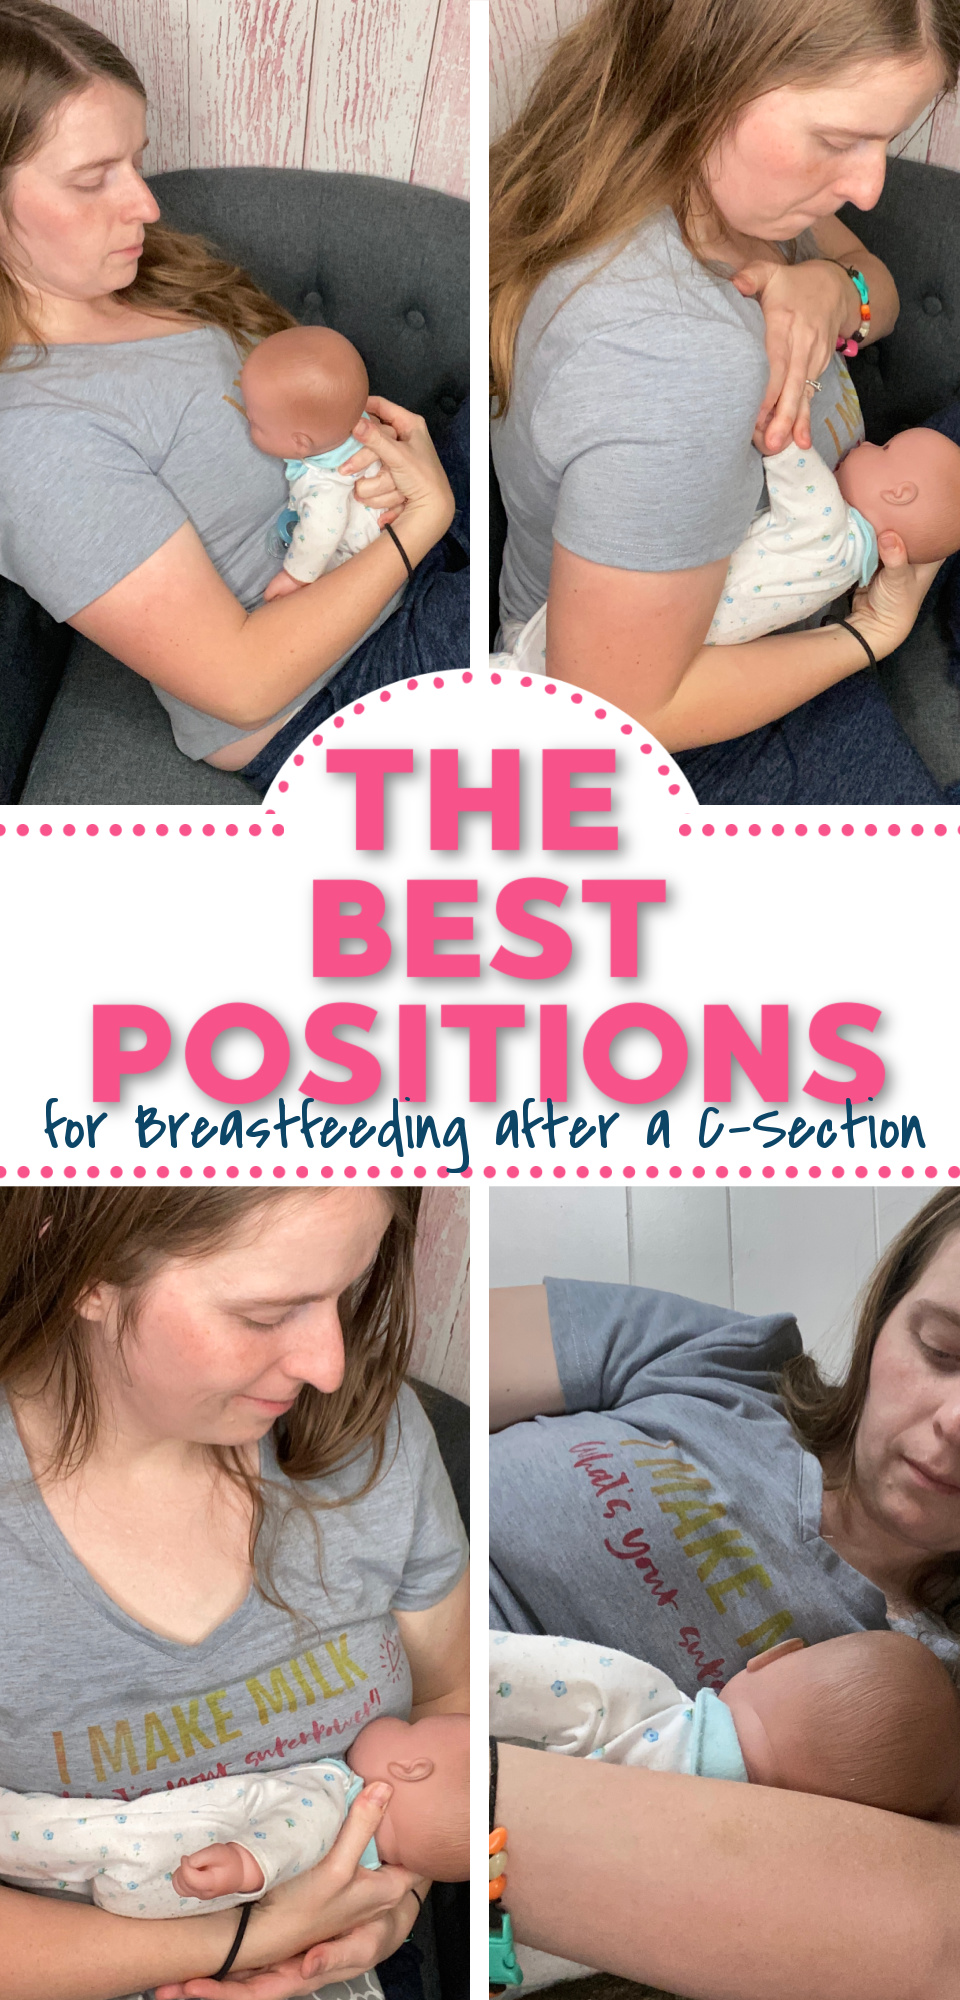 Breastfeeding after a c-section might require a little bit of extra help when it comes to getting comfortable. Here are the best c-section breastfeeding positions to help ease discomfort and pain!